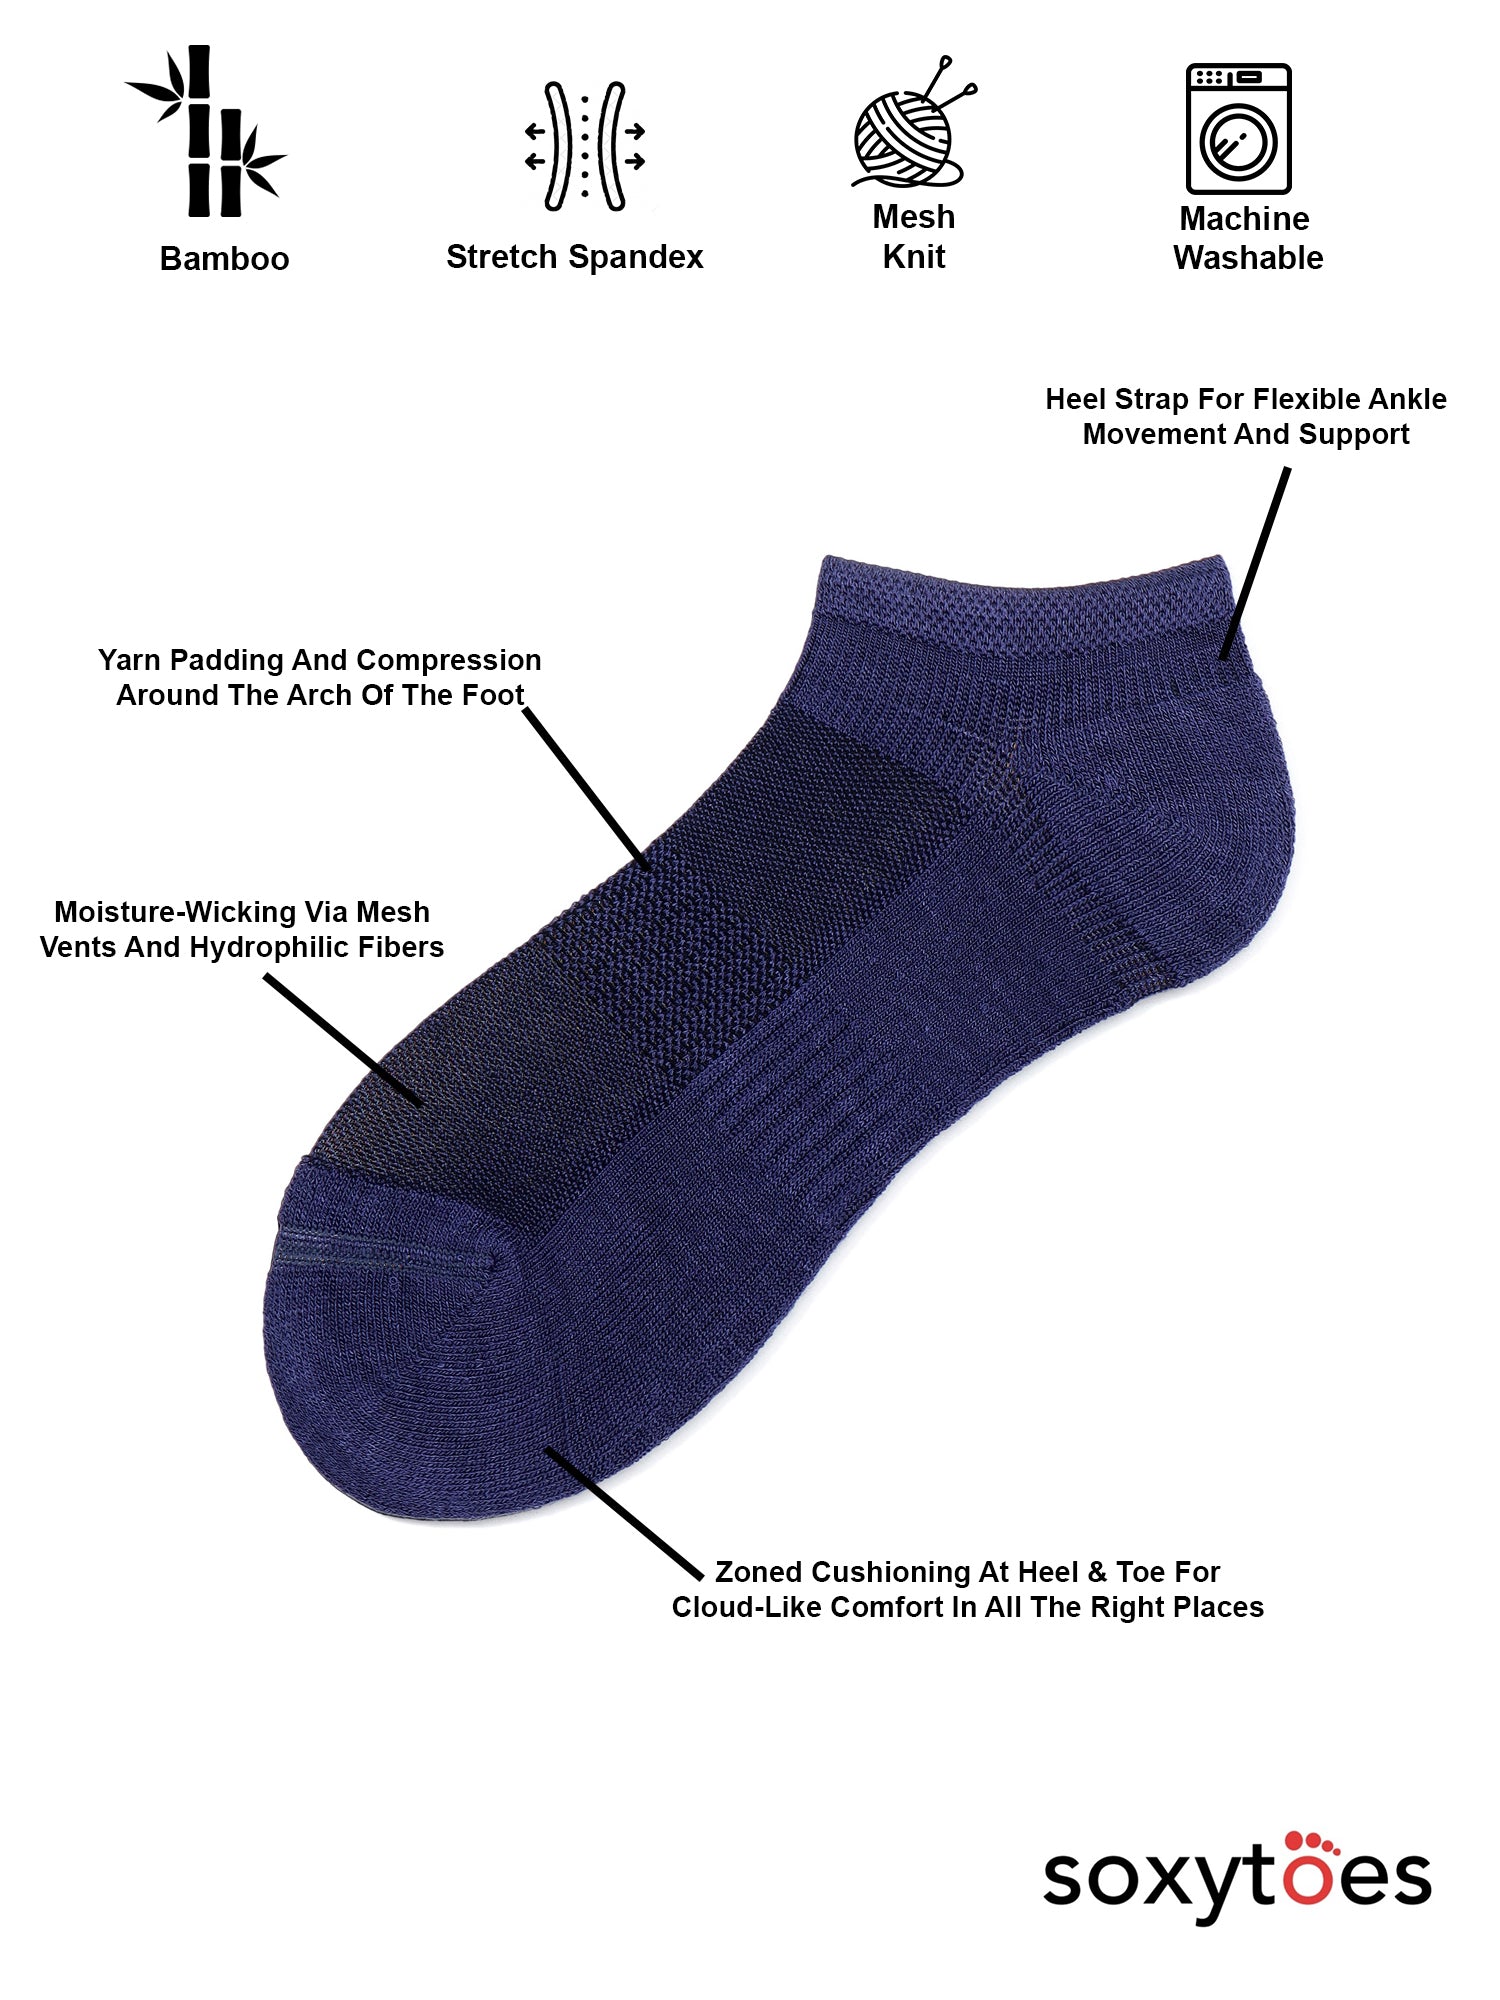 Worlds Best Sock ! Classic Casual Series